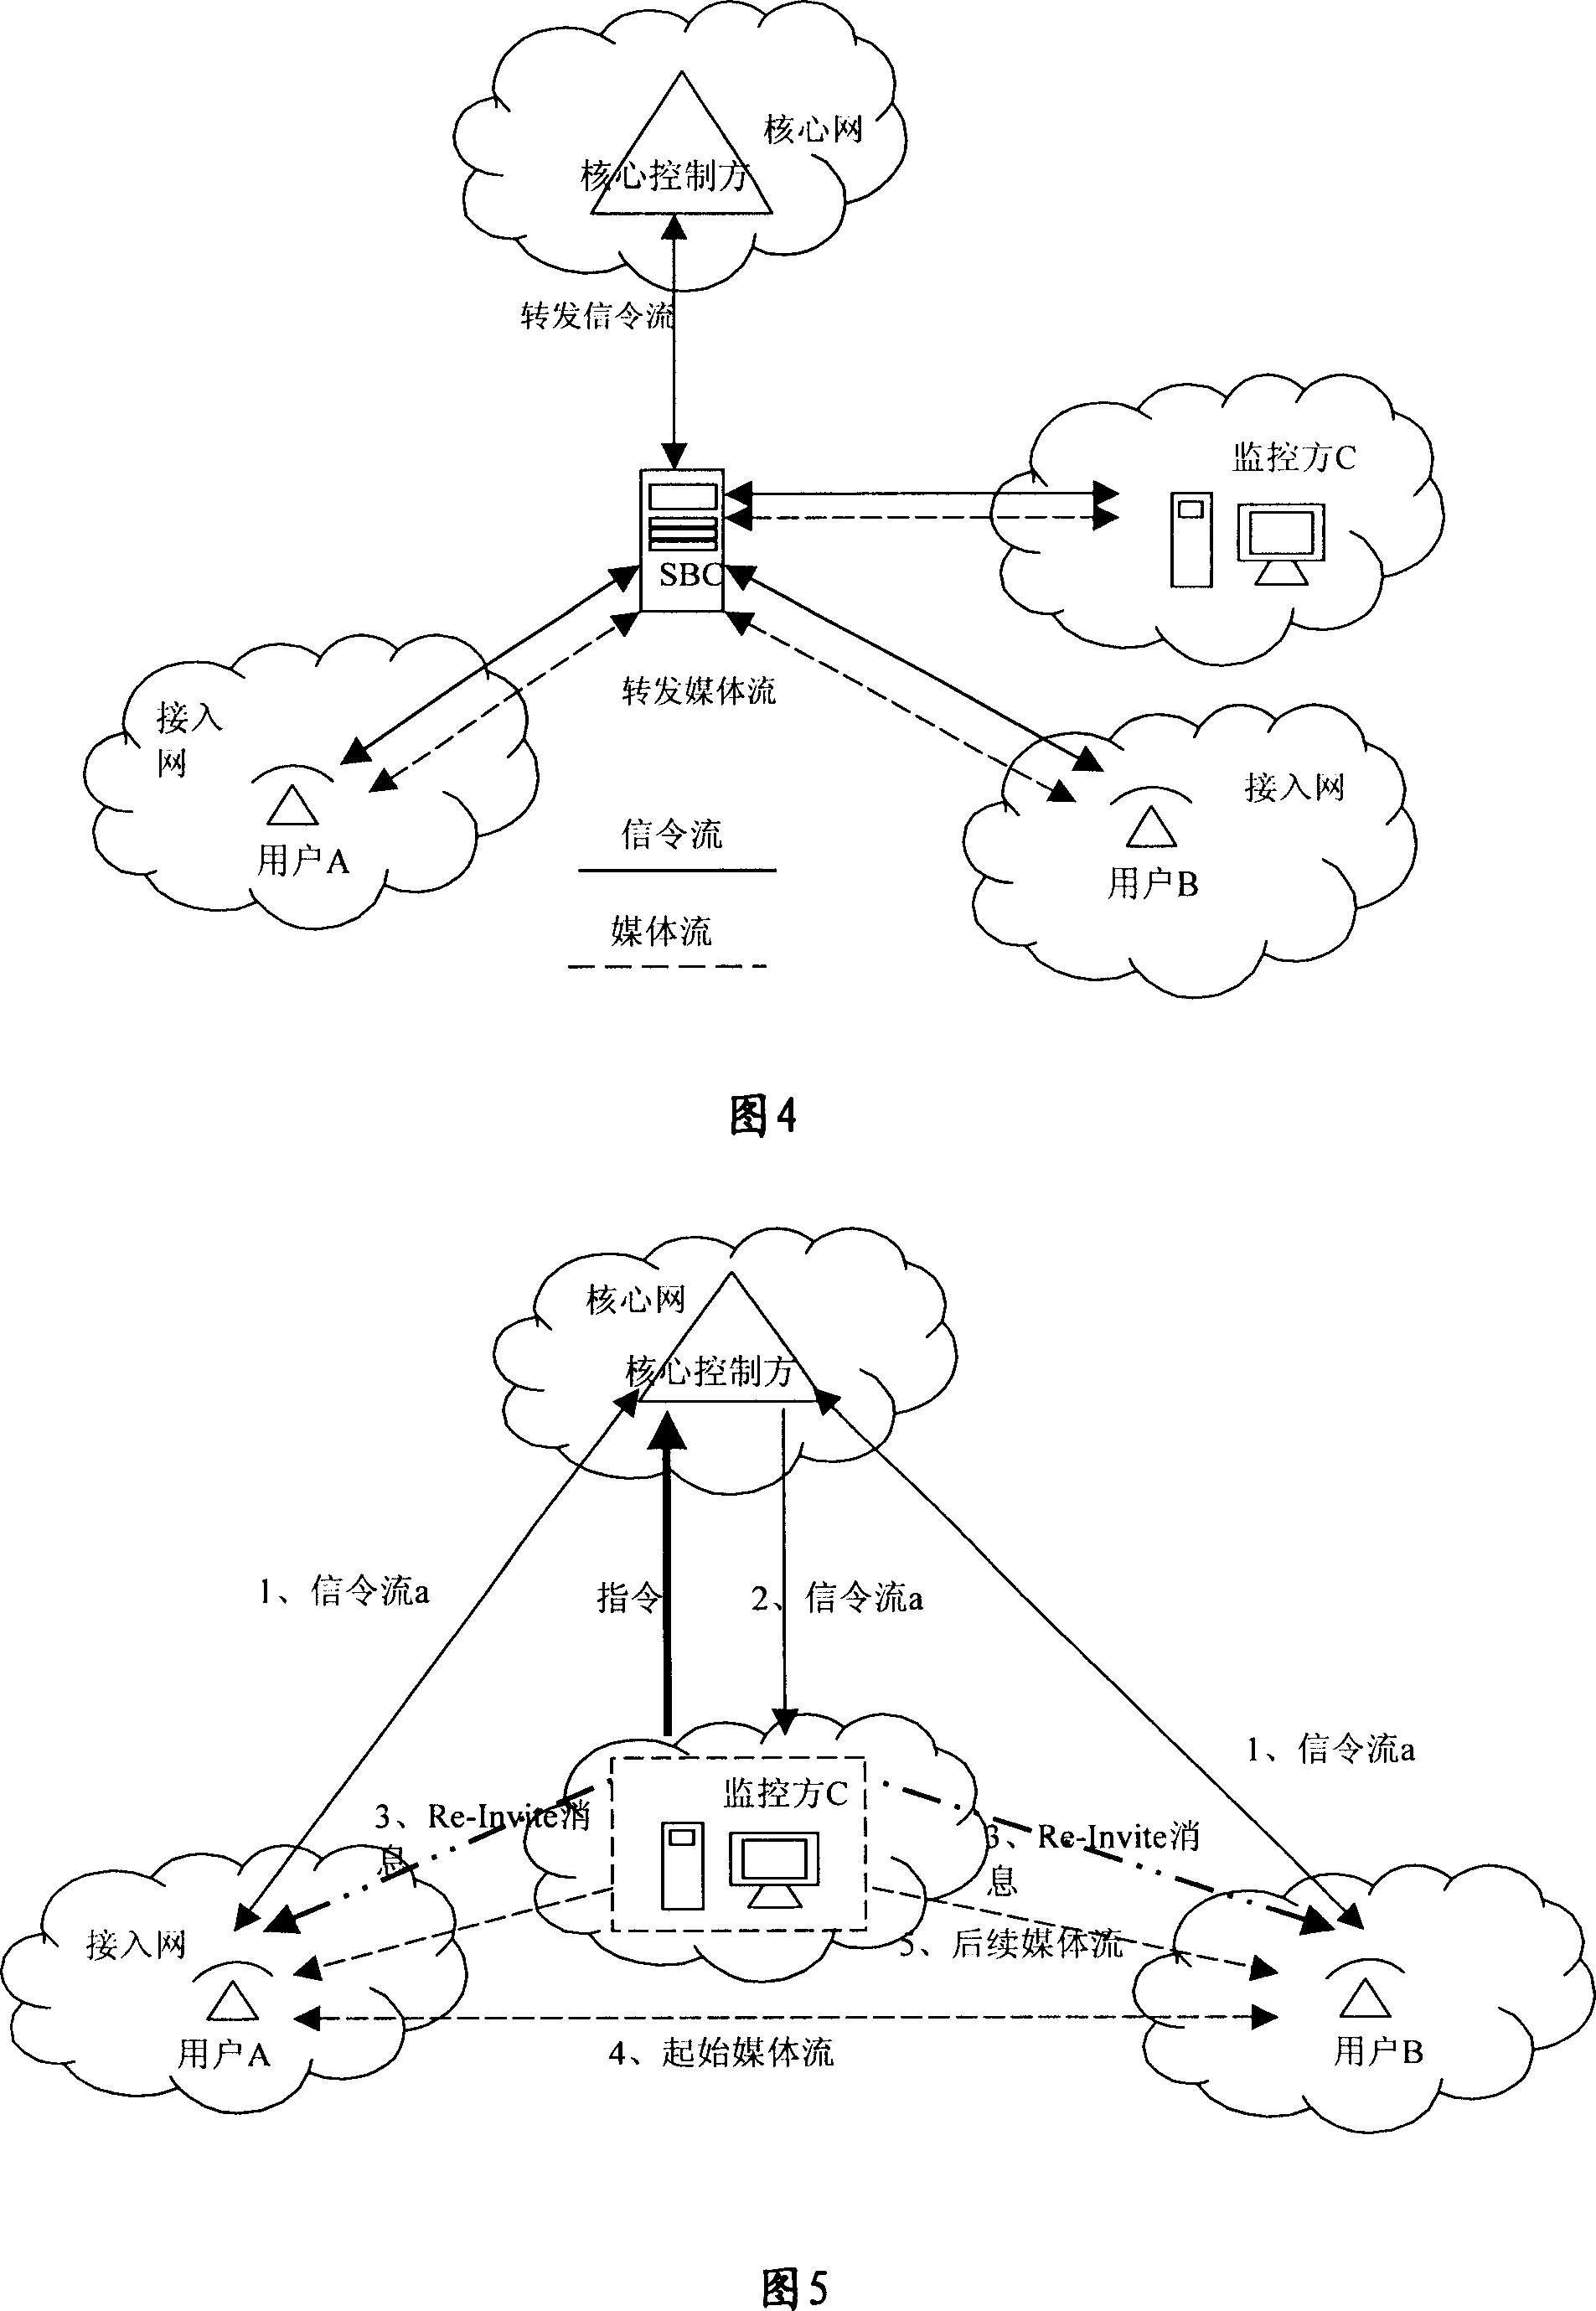 Network monitoring processing method and system